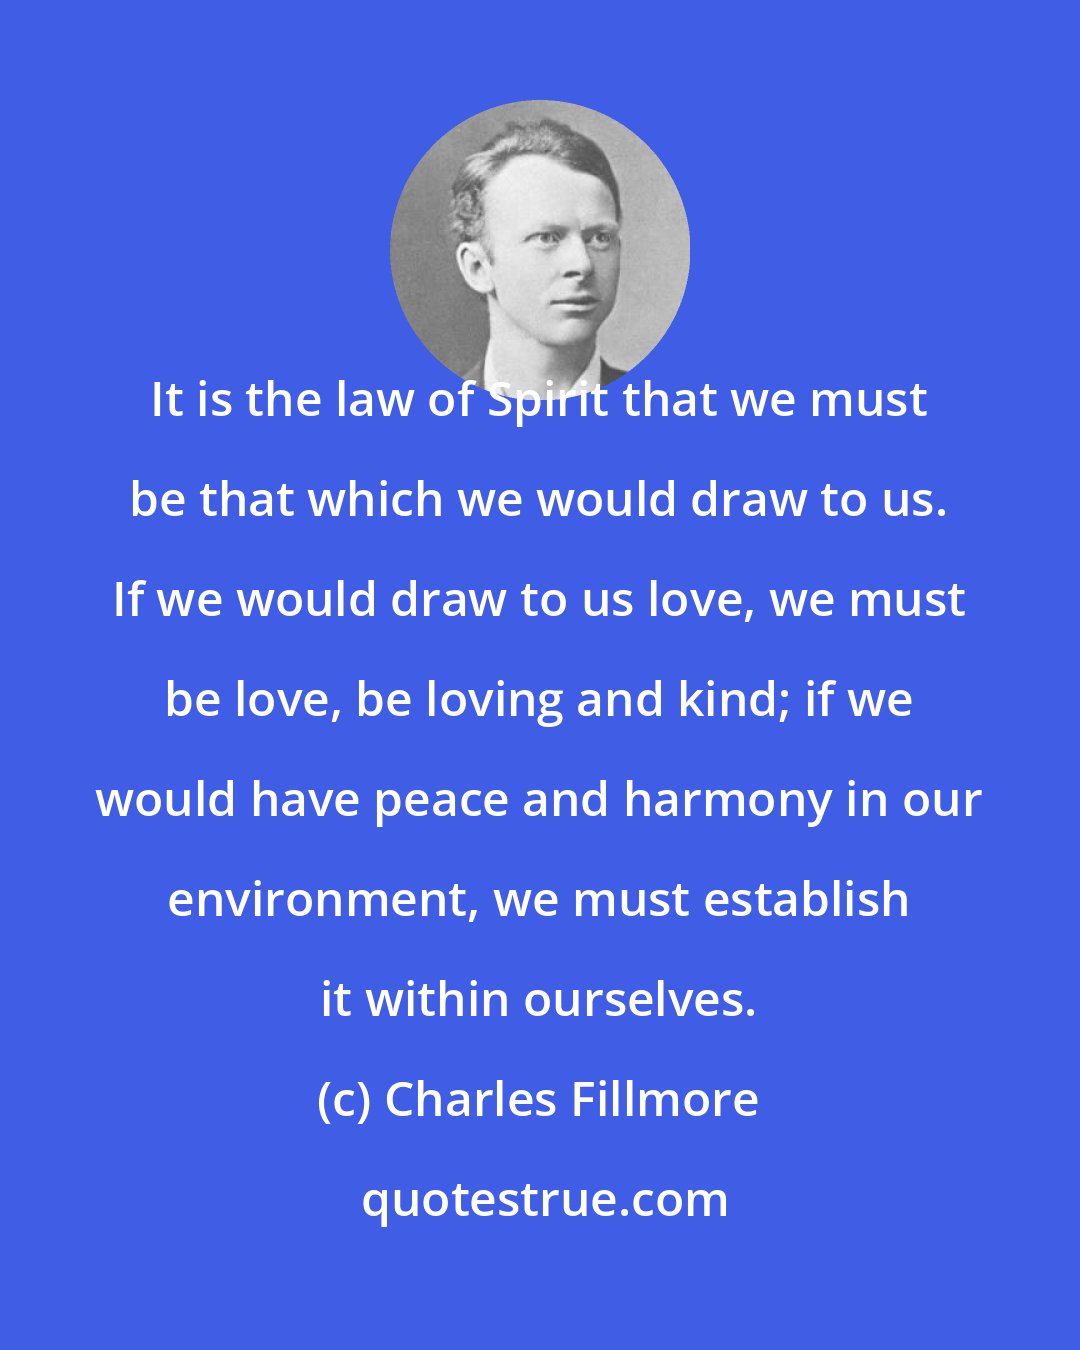 Charles Fillmore: It is the law of Spirit that we must be that which we would draw to us. If we would draw to us love, we must be love, be loving and kind; if we would have peace and harmony in our environment, we must establish it within ourselves.